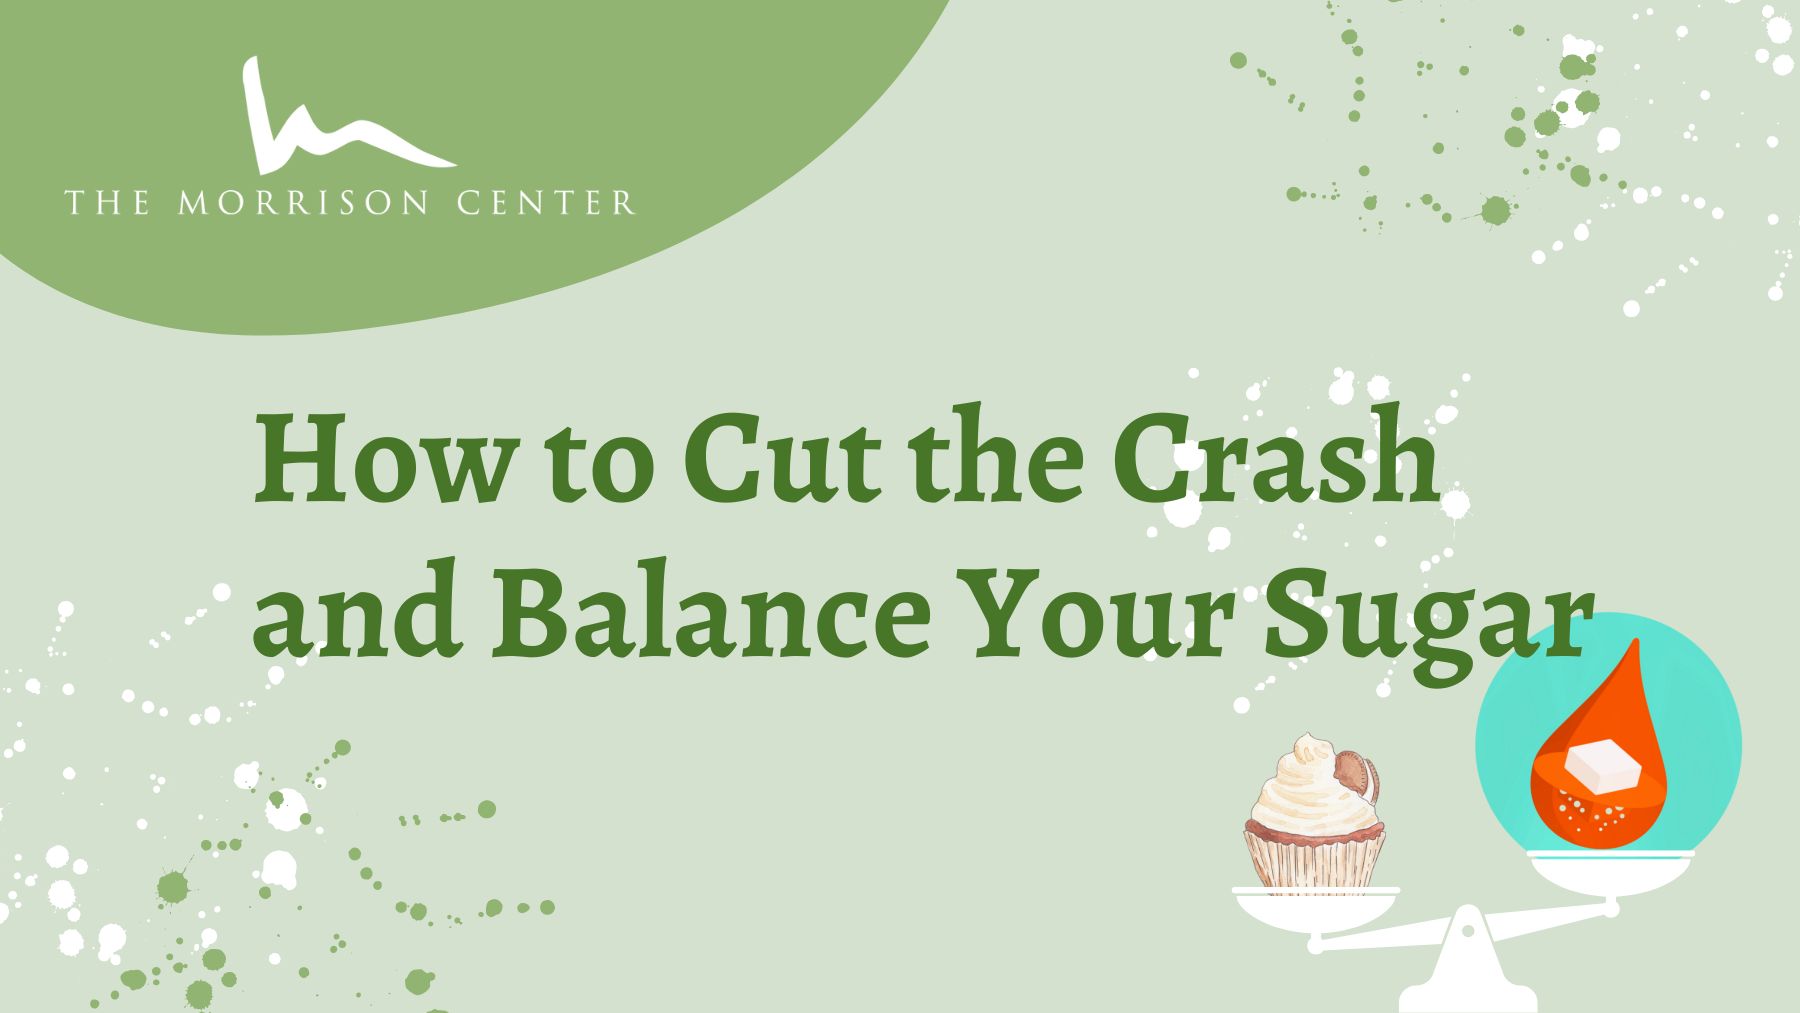 How to Cut the Crash and Balance Your Sugar